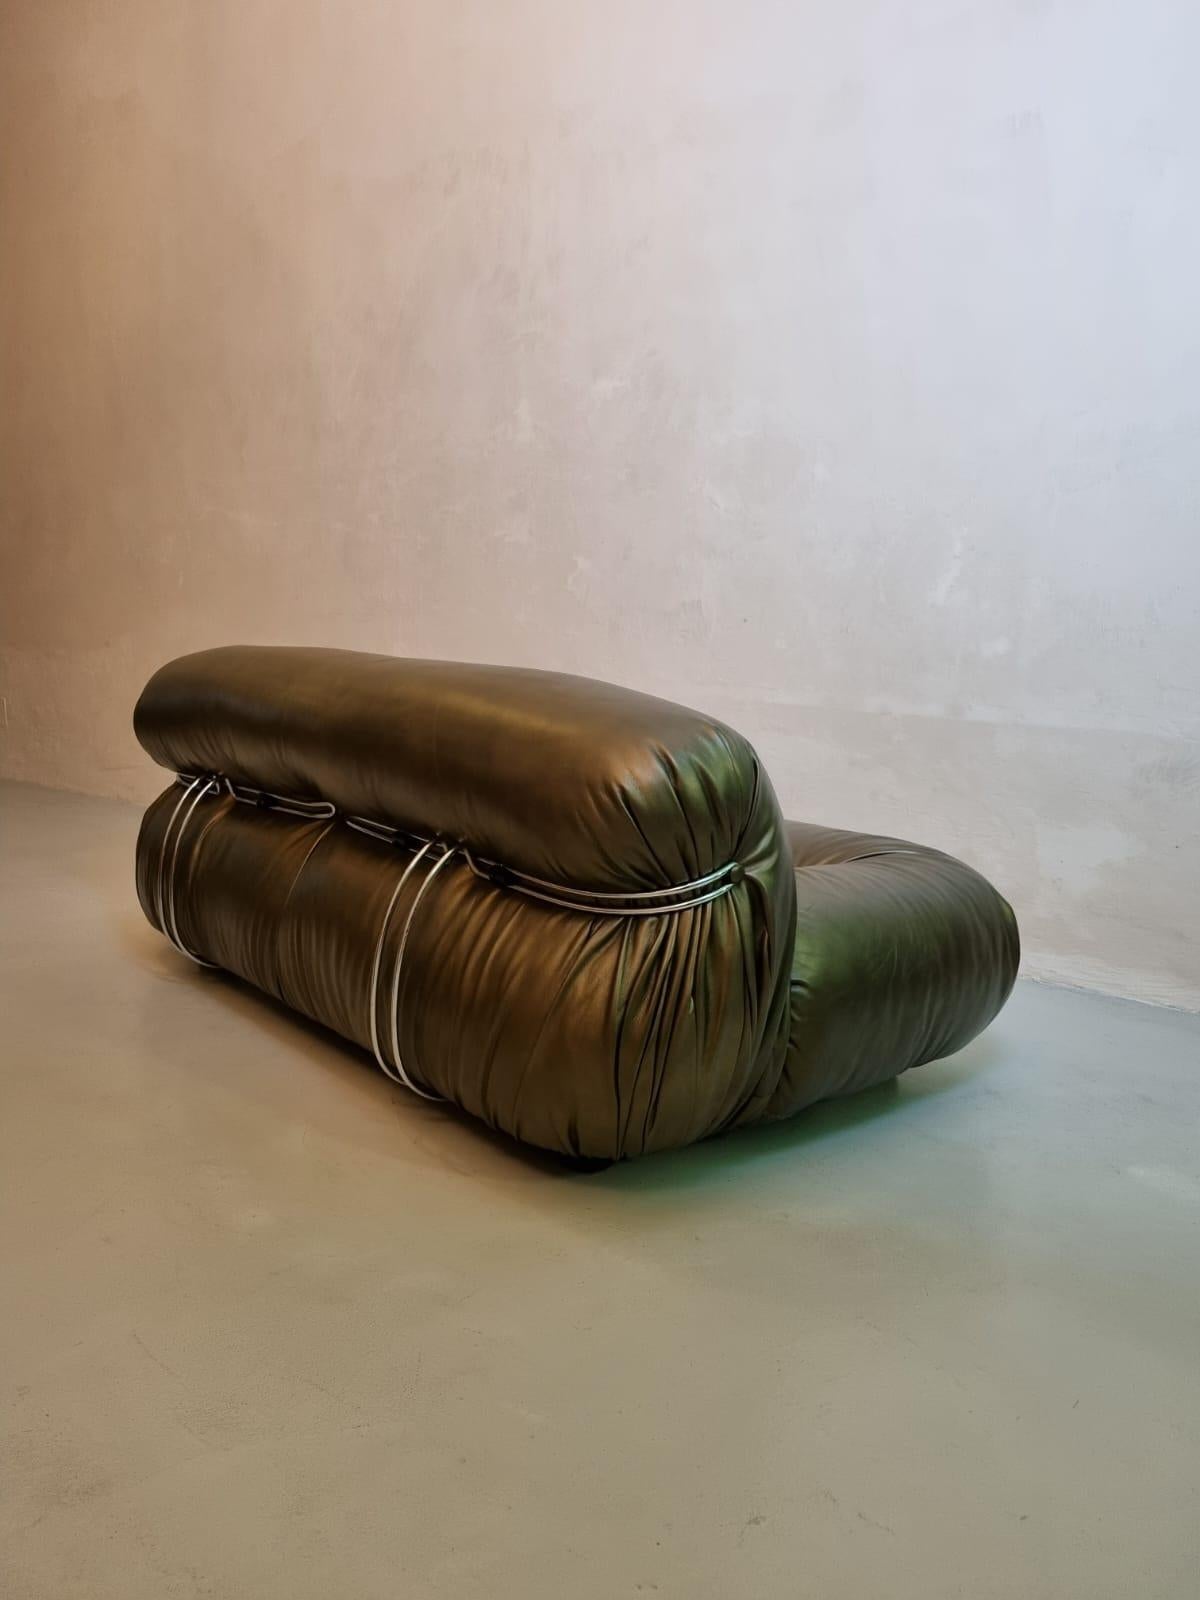 Soriana 2 seater by Afra and Tobia Scarpa for Cassina 1969,  reupholstered in  metallic green leather.
A true icon of style, Soriana, characterized by its abundant curves, was designed in 1969 by Afra and Tobia Scarpa and received a Compasso d'Oro